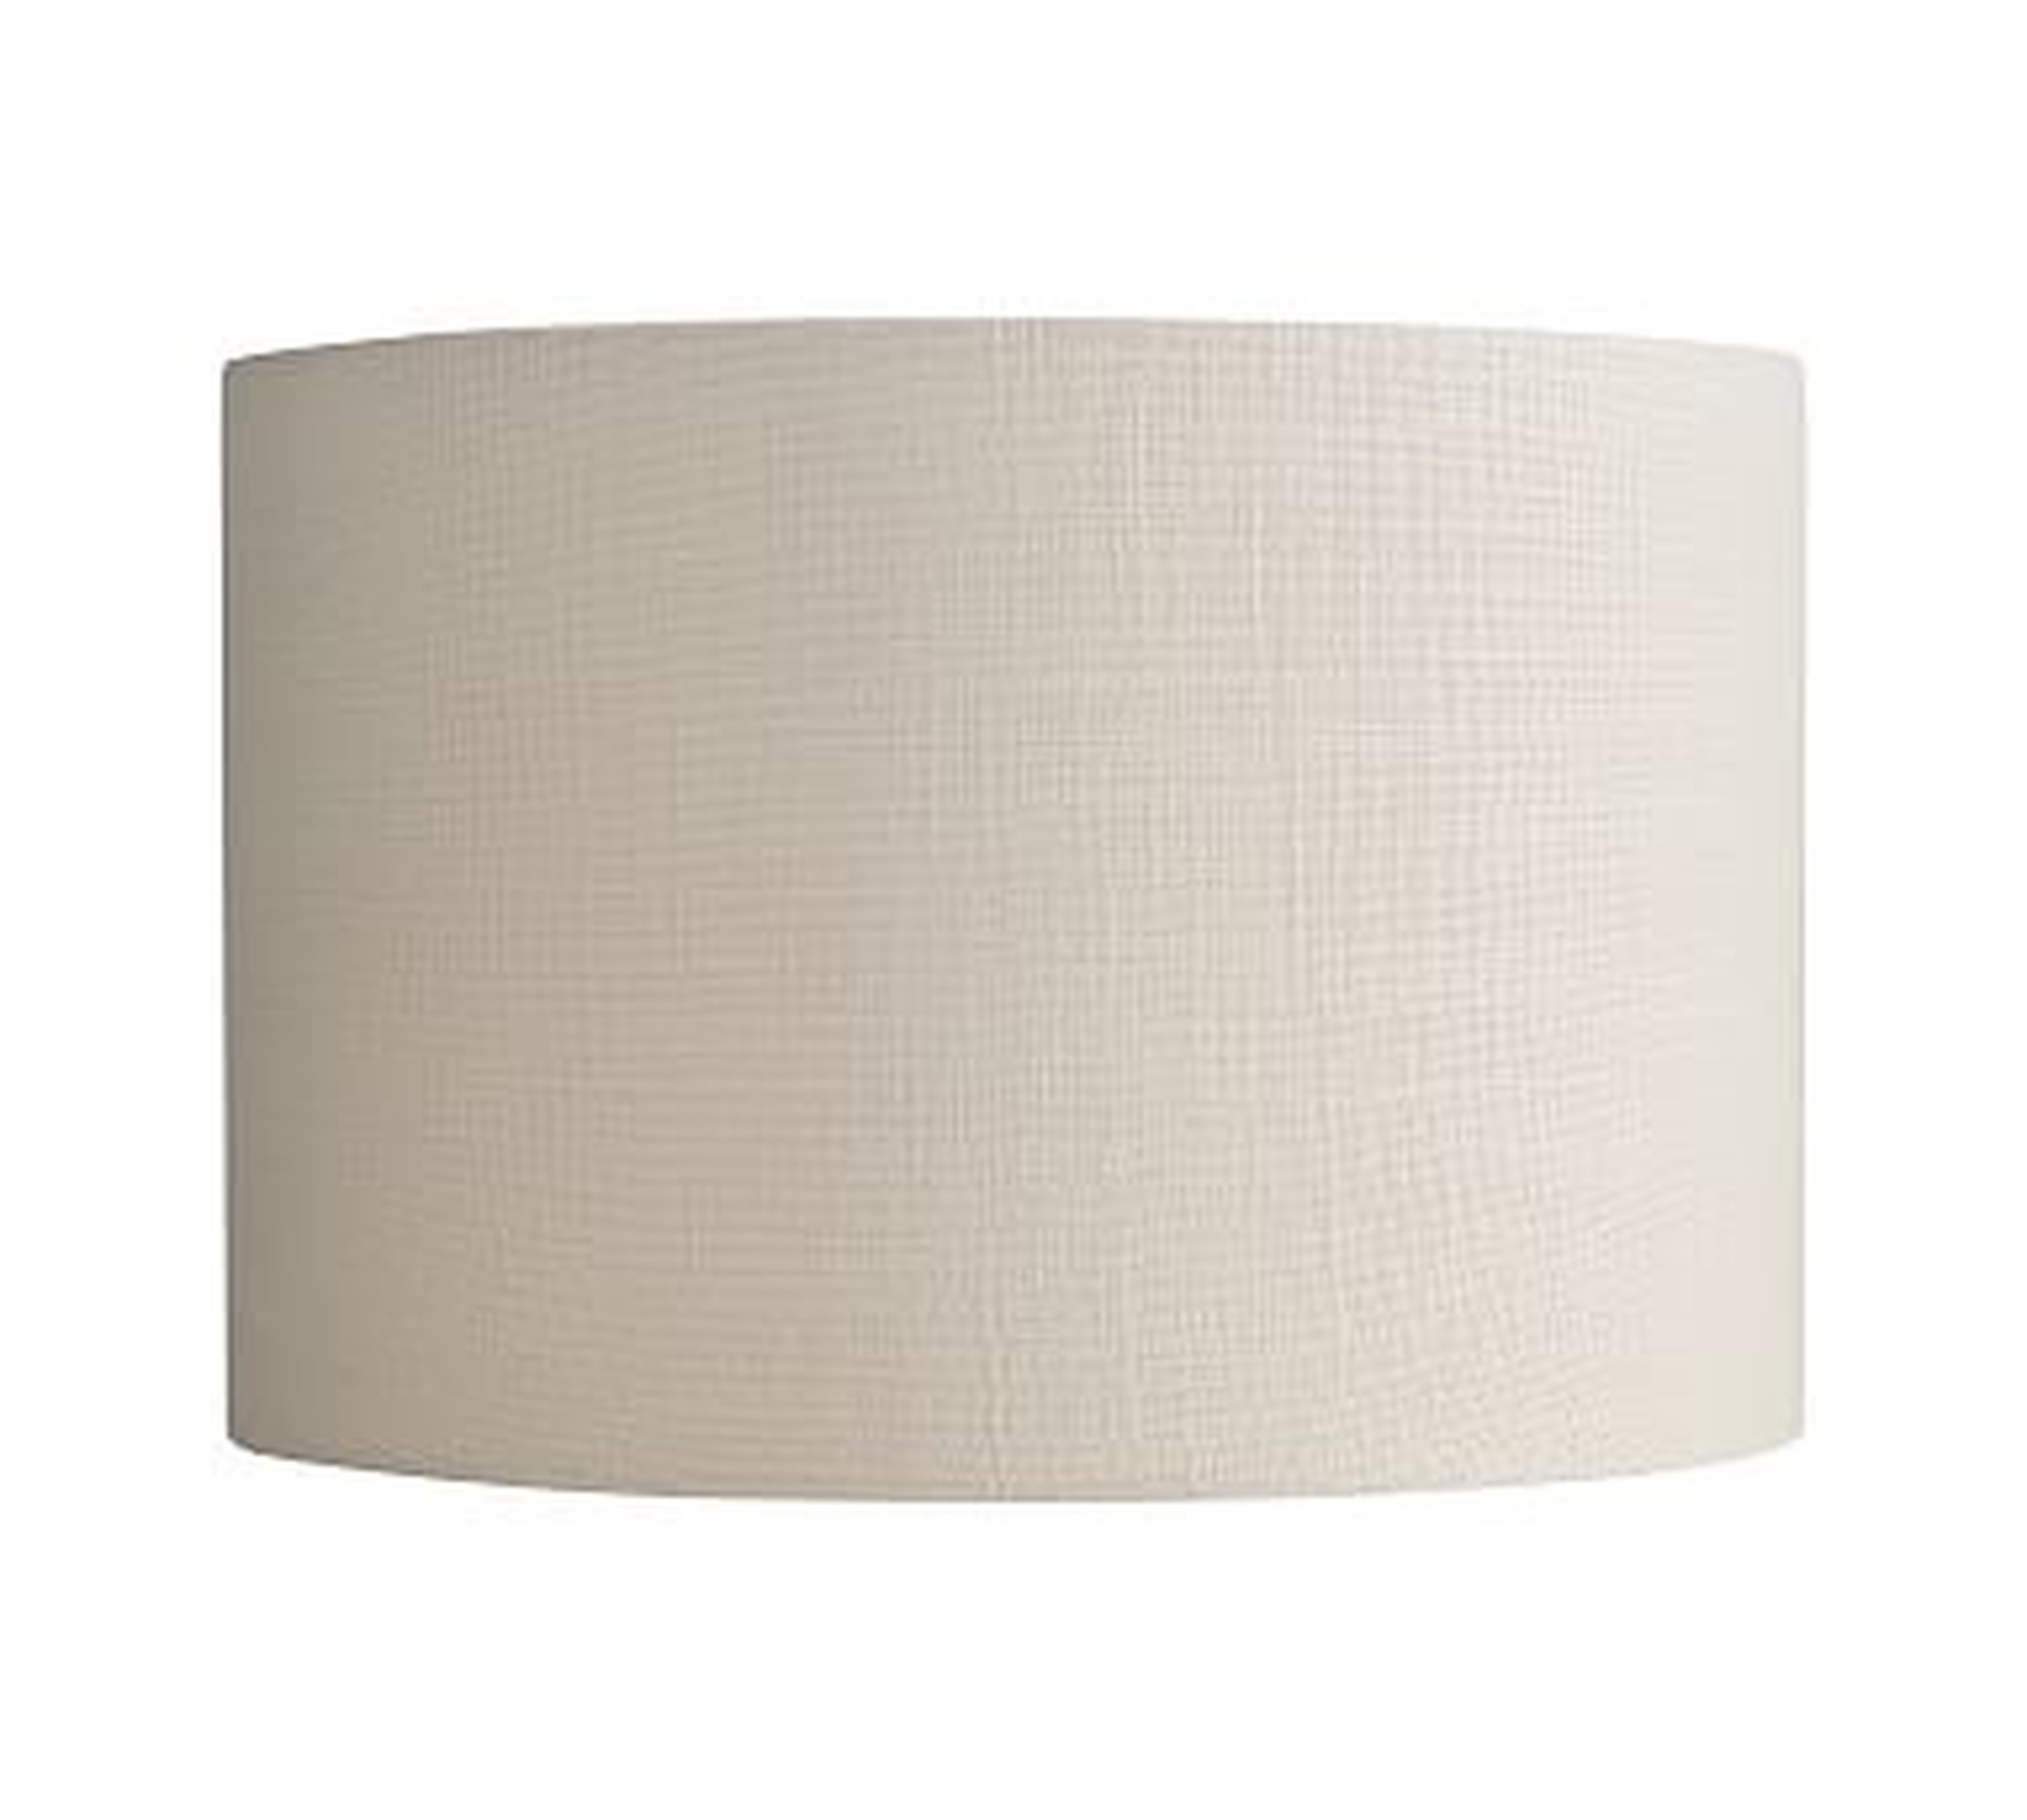 Gallery Straight Sided Linen Drum Lamp Shade, Large, Sand - Pottery Barn